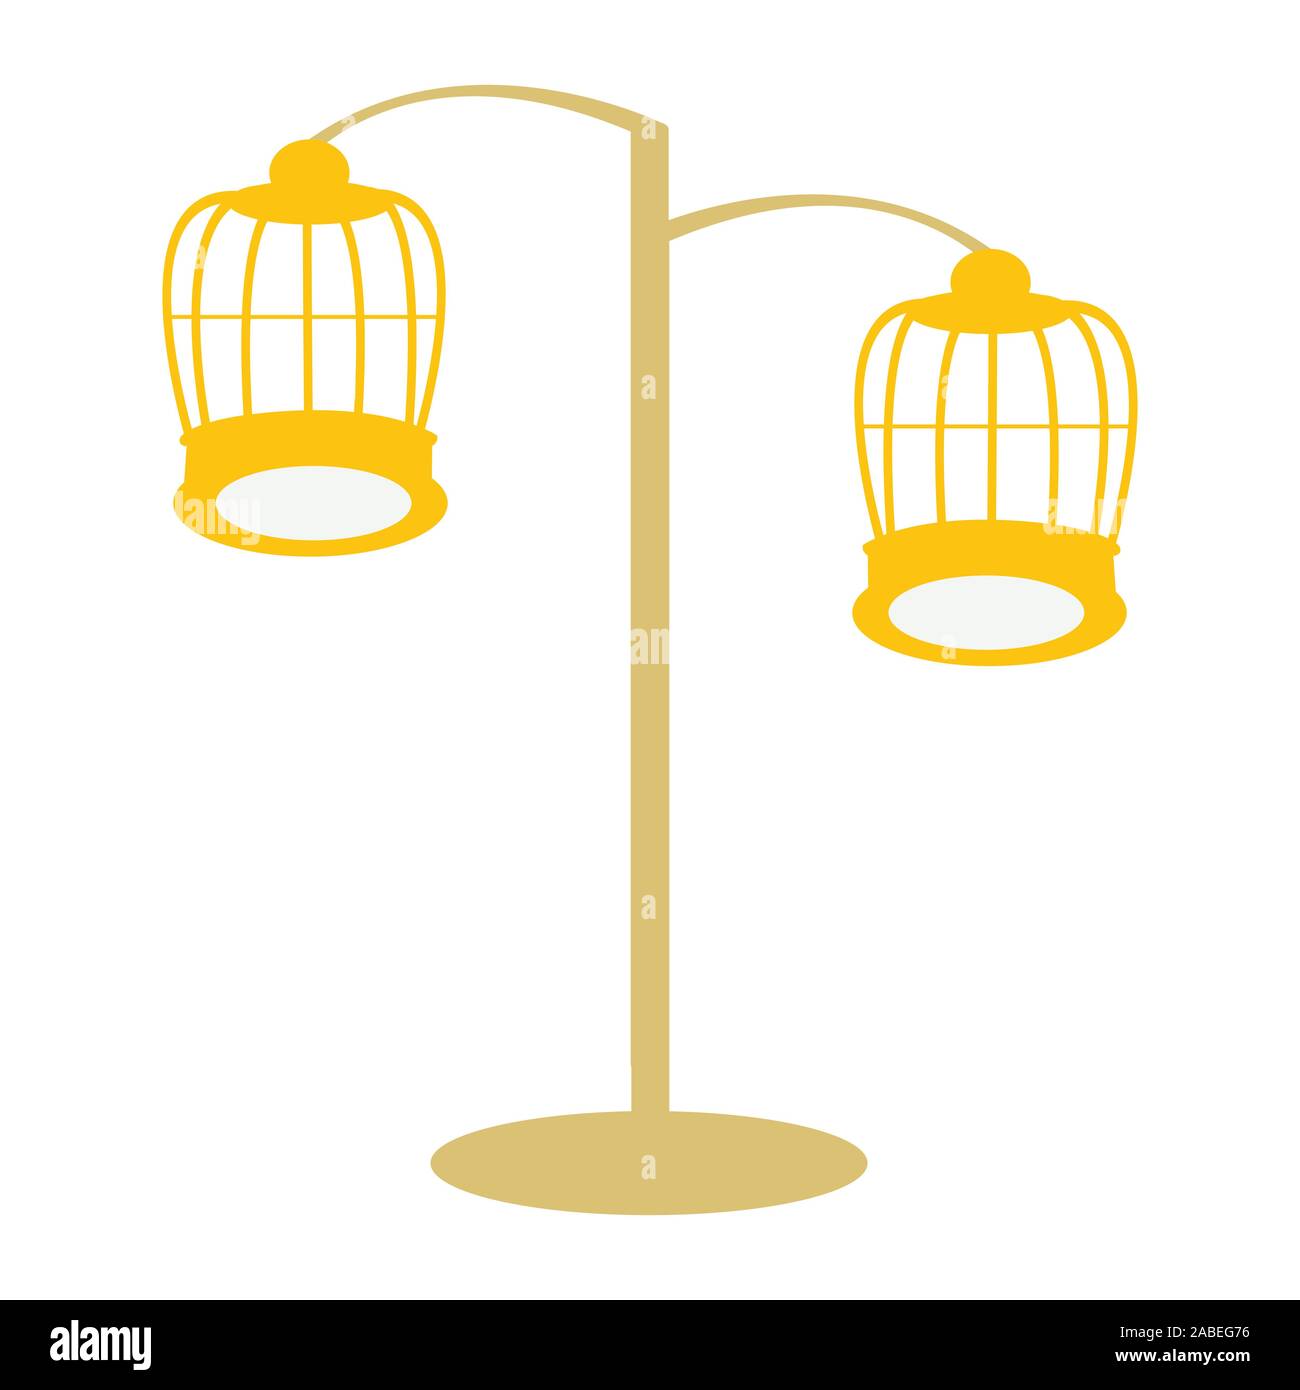 Two Golden Bird Cages Connected To a Pole Stock Vector